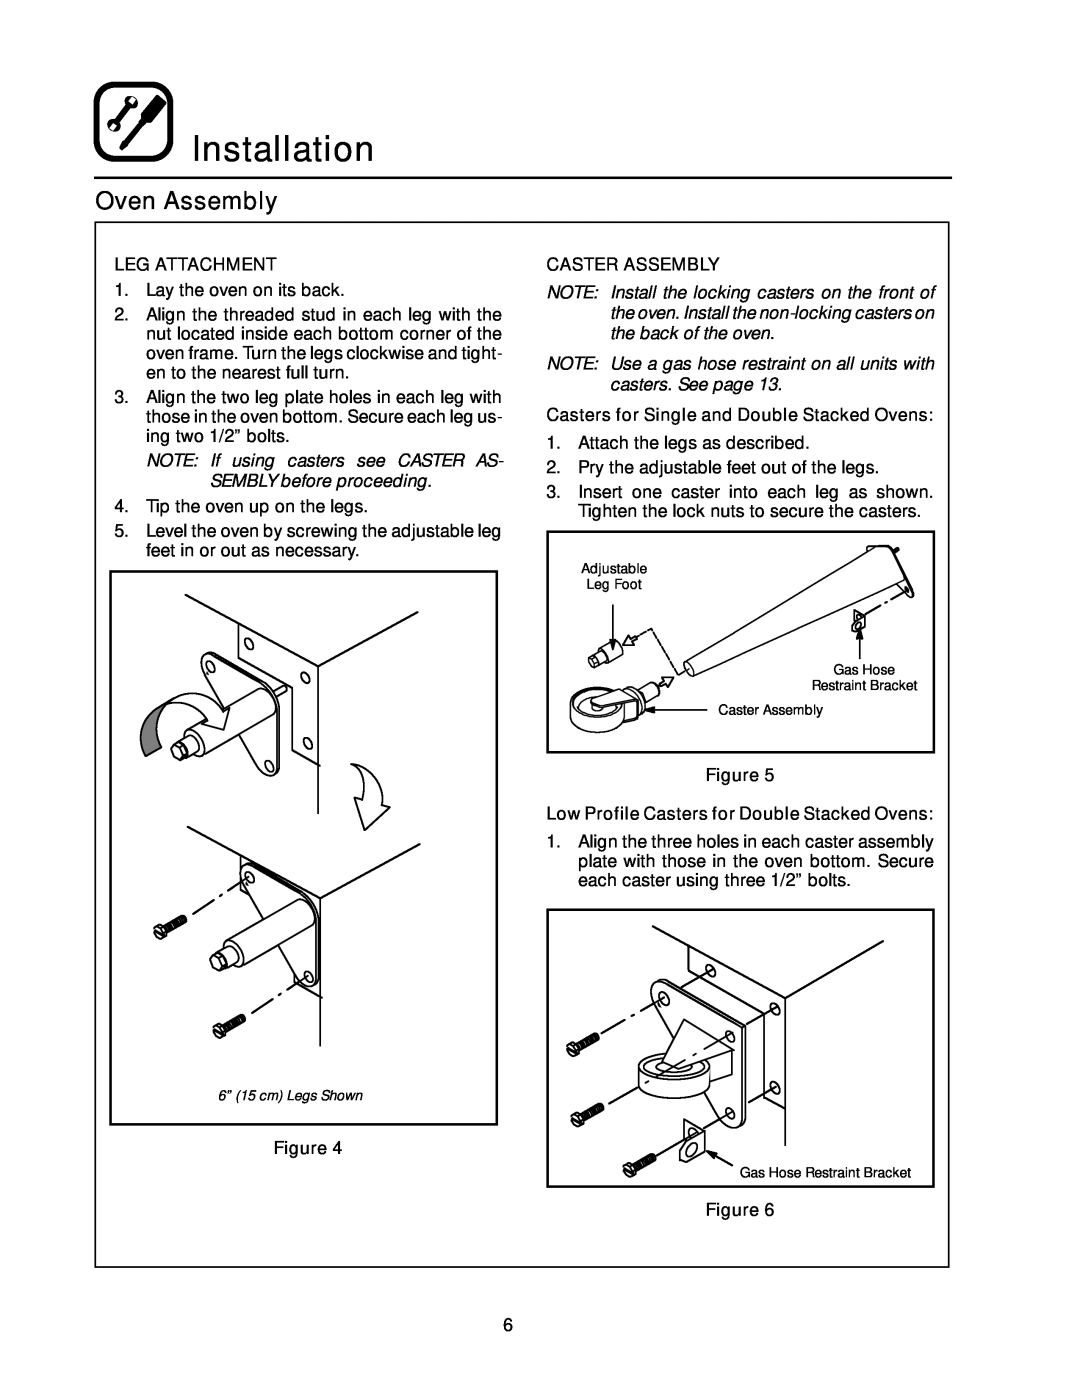 Blodgett RE Series manual Installation, Oven Assembly, Leg Attachment, Caster Assembly 